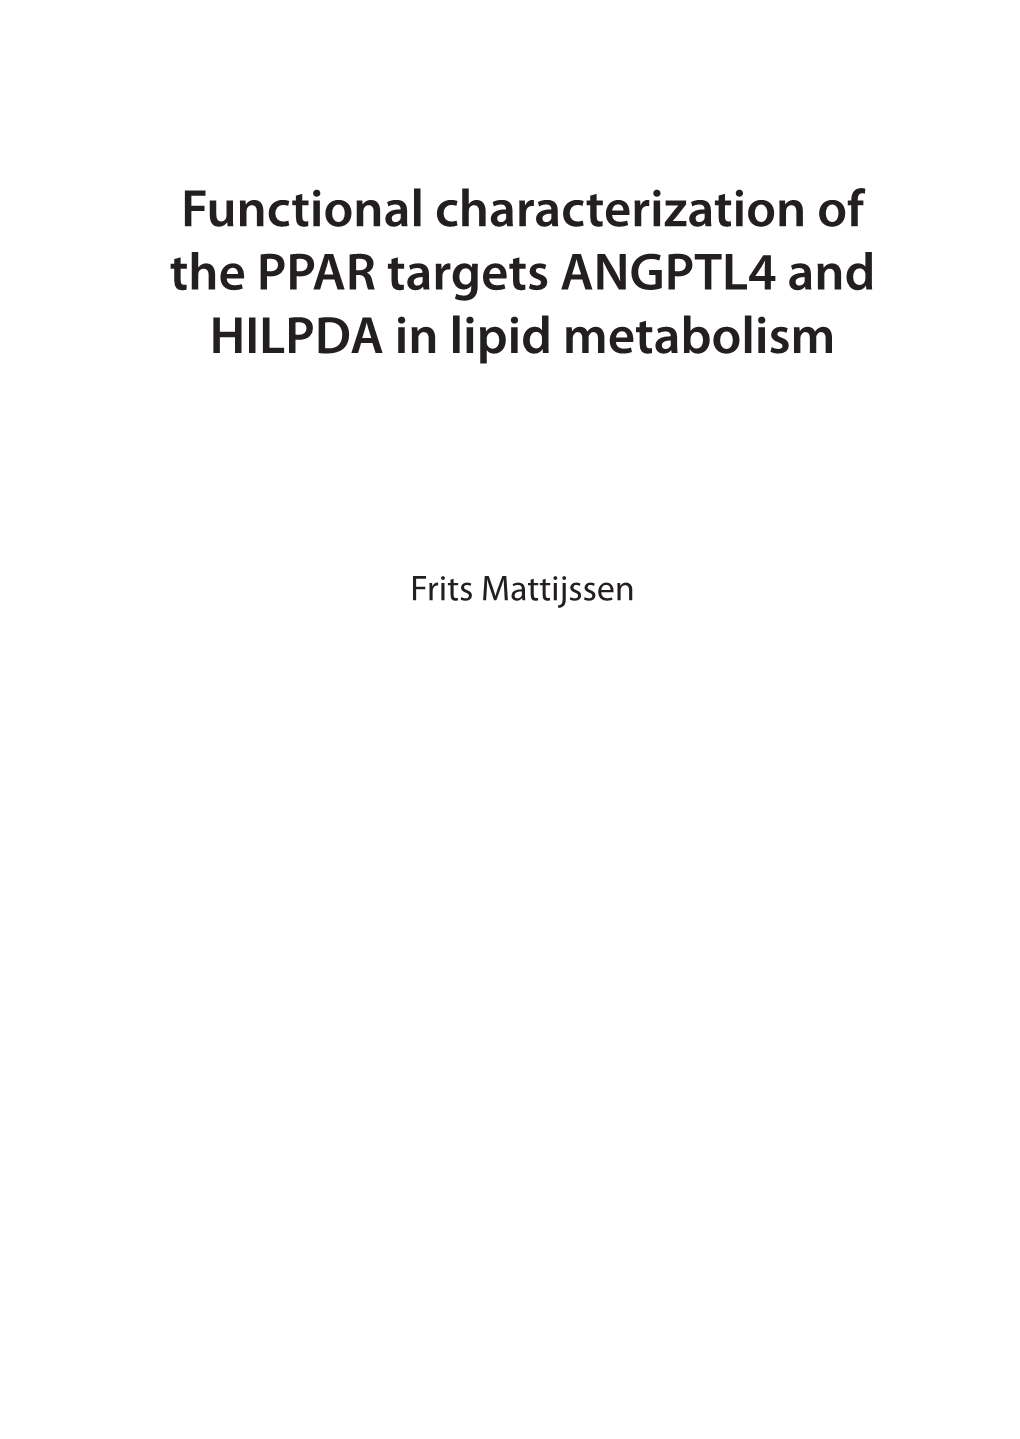 Functional Characterization of the PPAR Targets ANGPTL4 and HILPDA in Lipid Metabolism